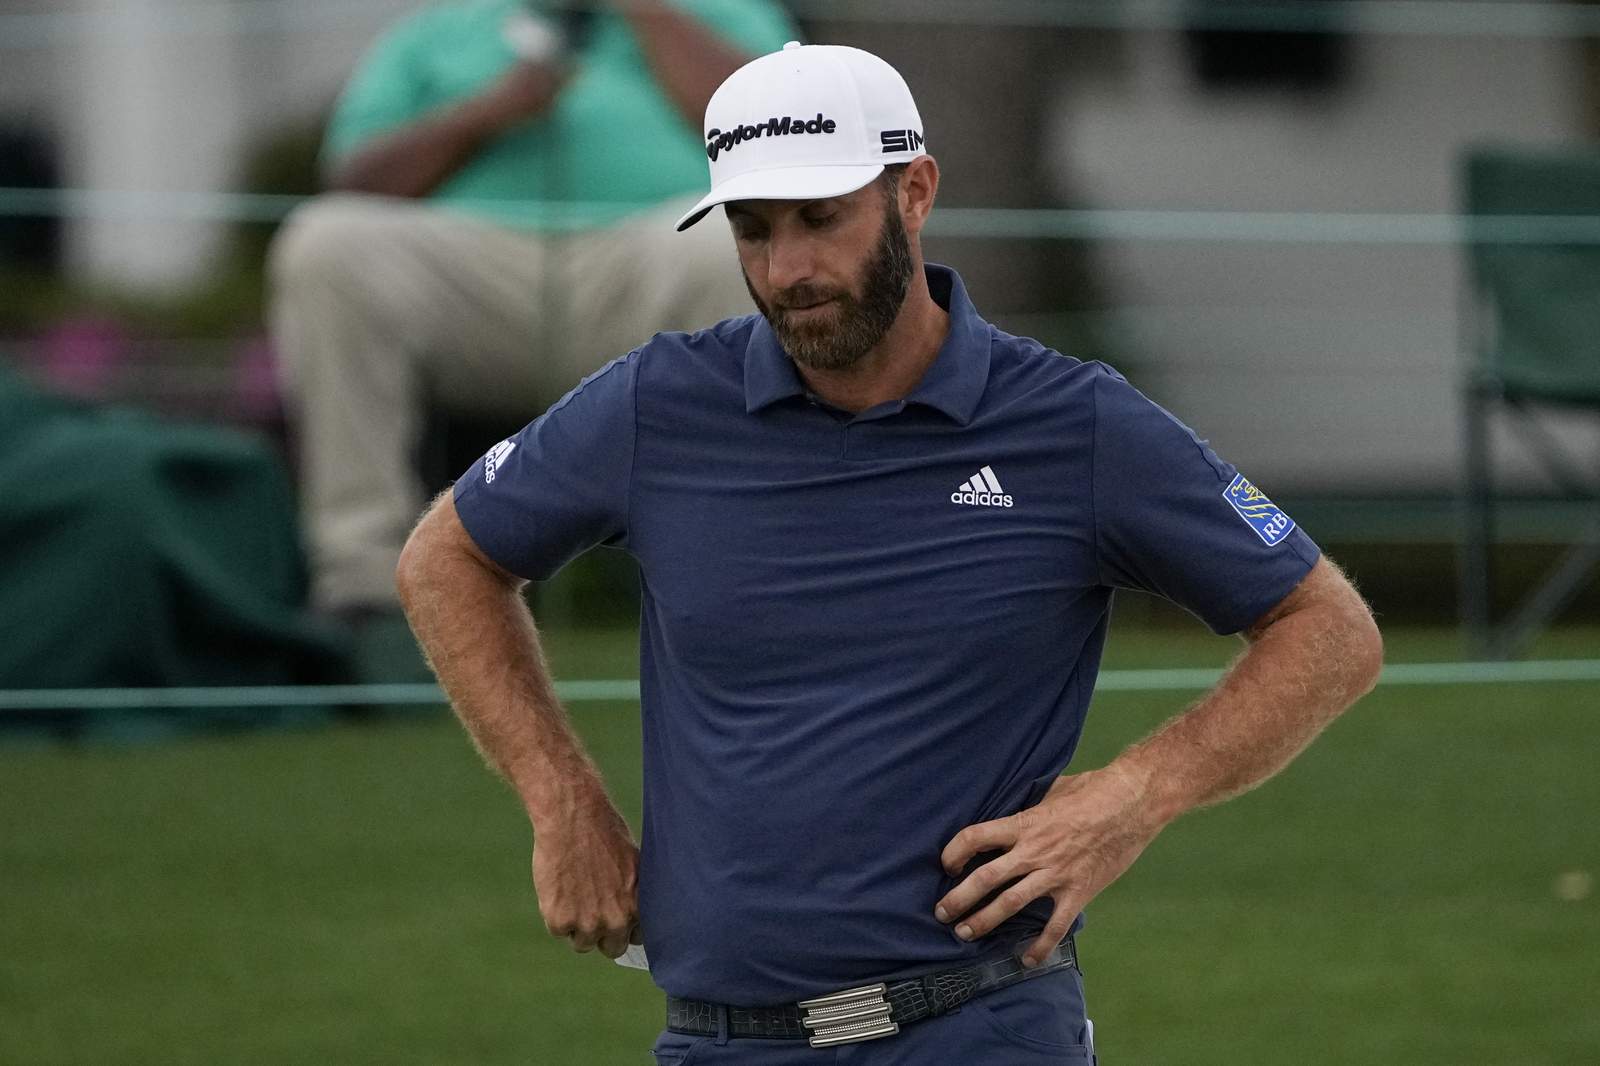 Dustin Johnson's Masters reign ends with missed cut